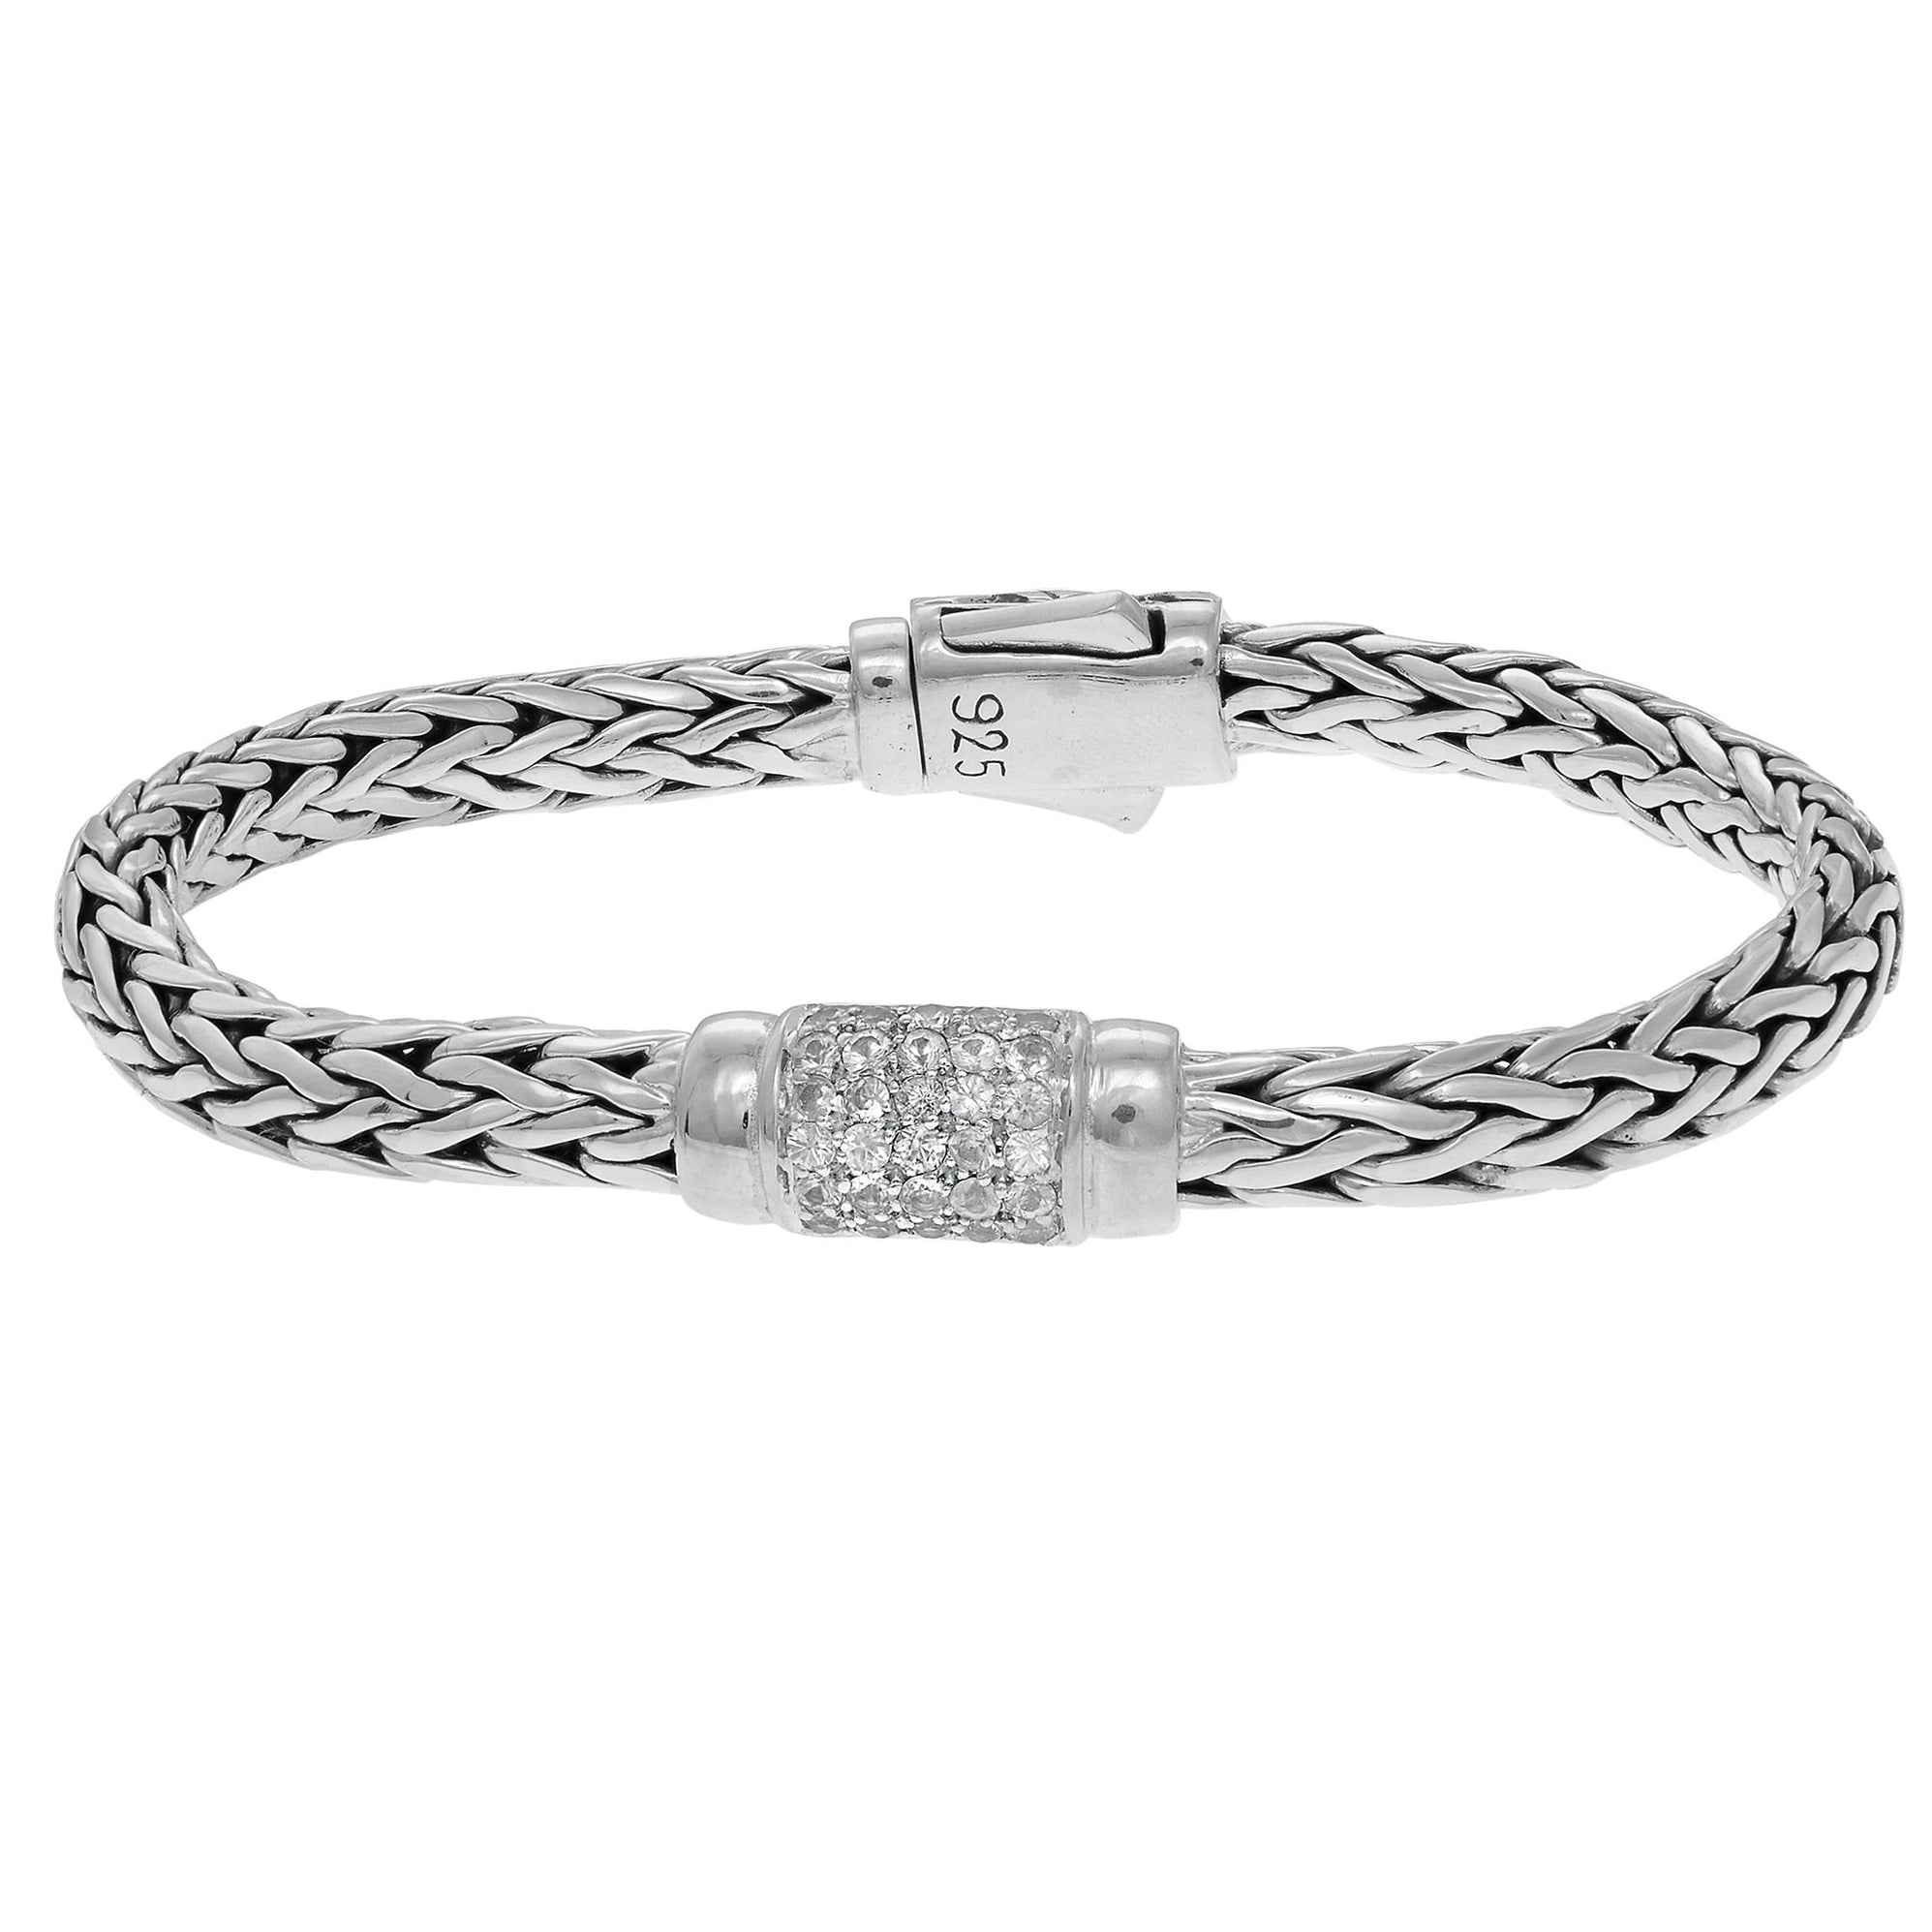 Sterling Silver 7.5 inches 4x6mm Oval Weave Bracelet with Round Faceted ...